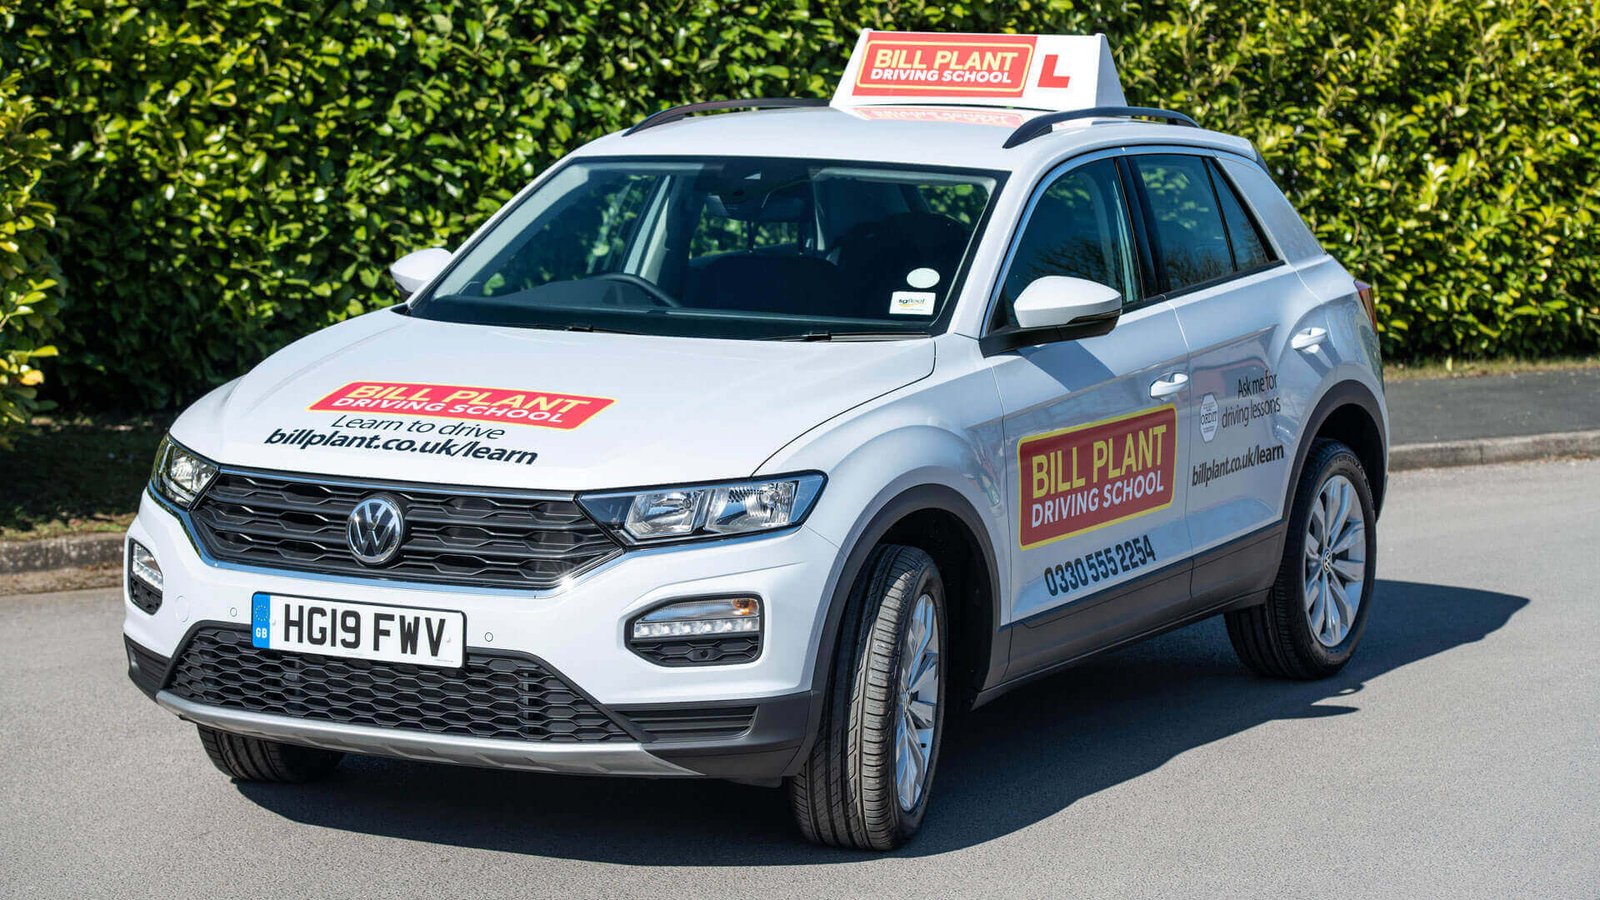 Looking for the best driving schools in the UK? Check out our list of top driving schools, including AA Driving School, RED Driving School